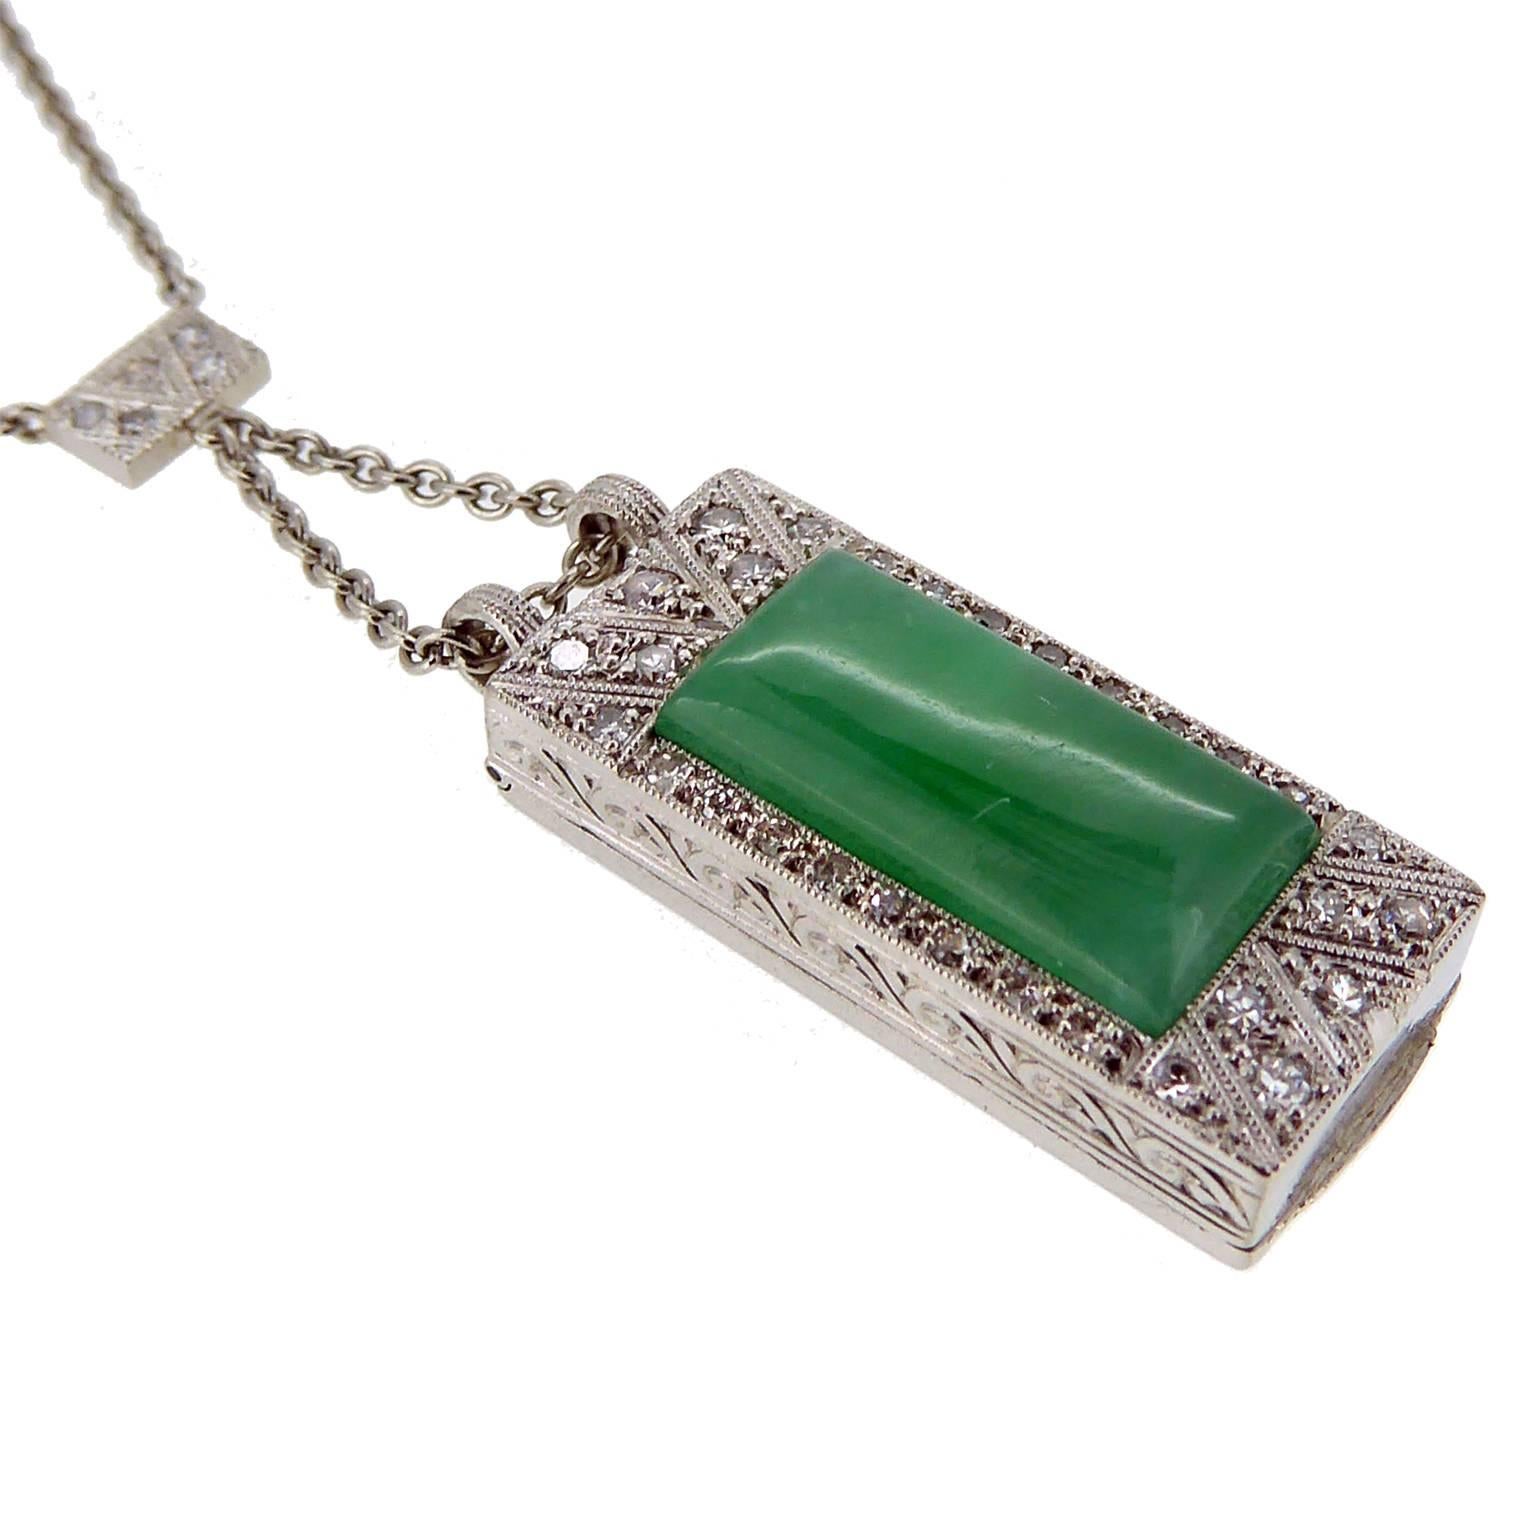 Previously worn as a cocktail watch,  absolutely stunning reworking of an Art Deco Diamond jewel into a very special jade and diamond necklace.  The jade is a cabochon cut cut rectangle, custom cut for the pendant and set within a diamond surround